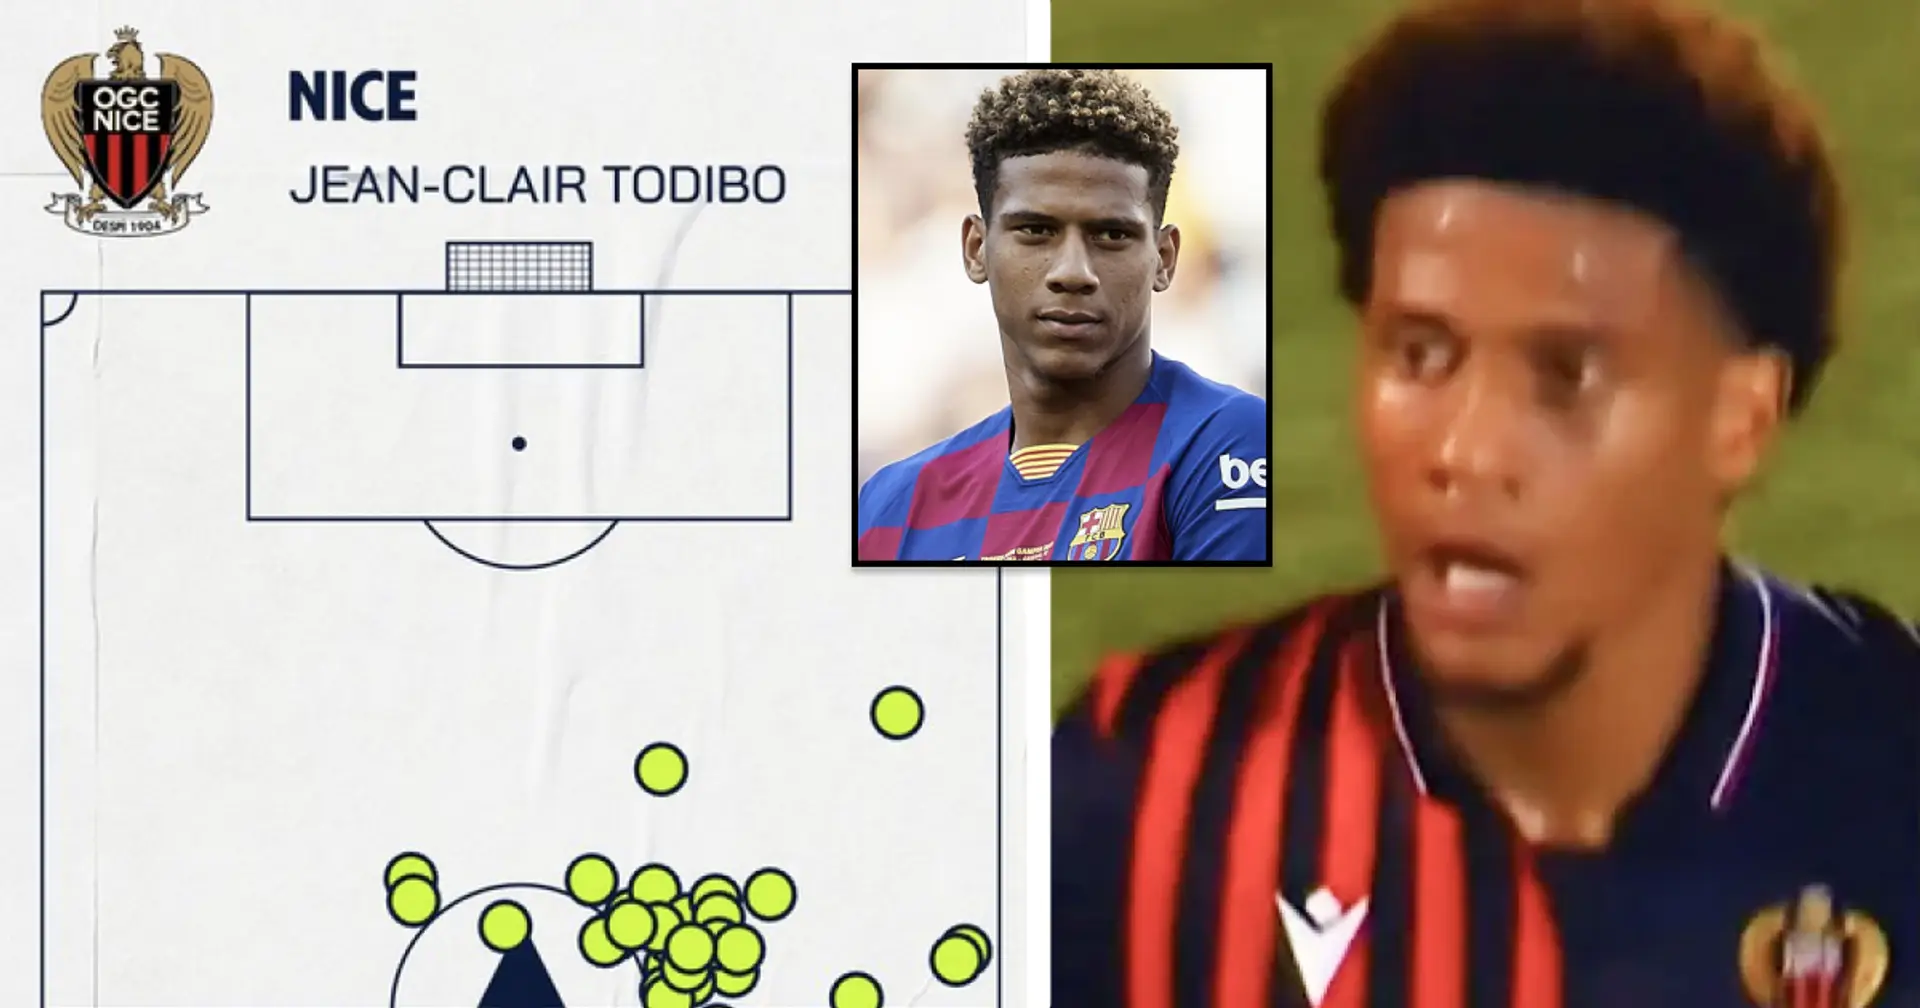 Jean-Clair Todibo sets special record – Barca could want him back after this